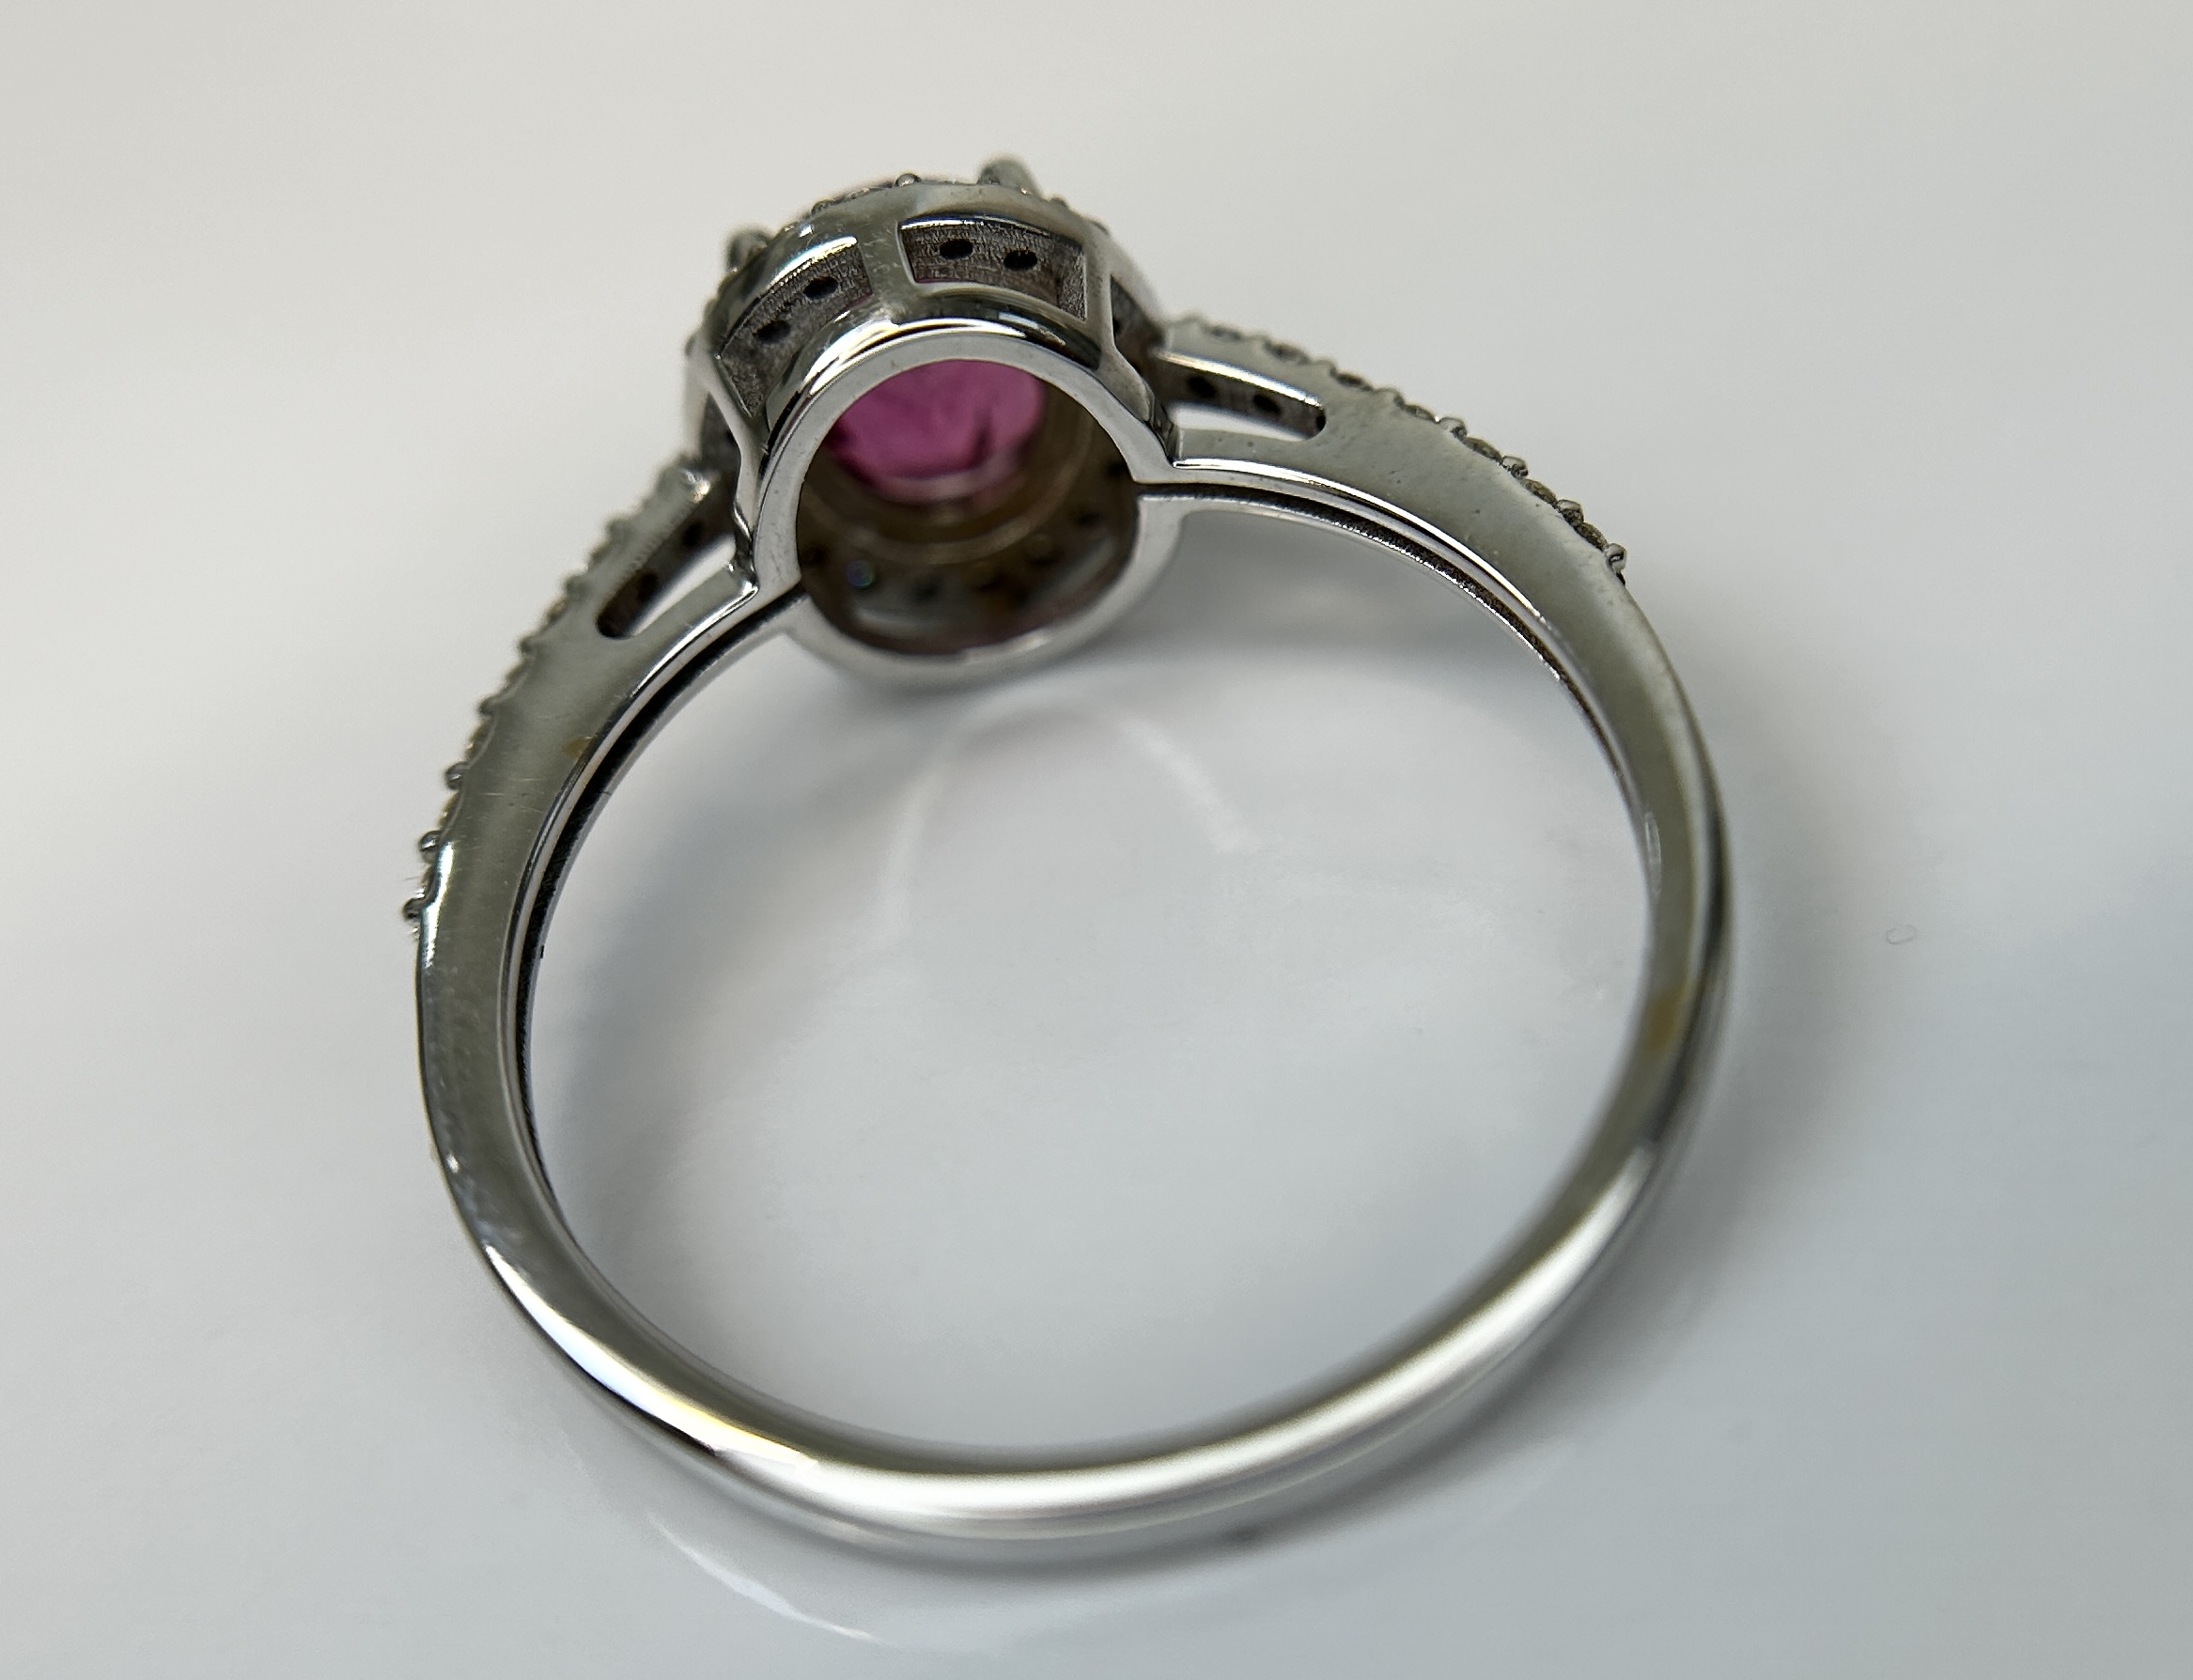 Beautiful Natural Tourmaline Rubellite Ring With Diamonds and 18k Gold - Image 5 of 8